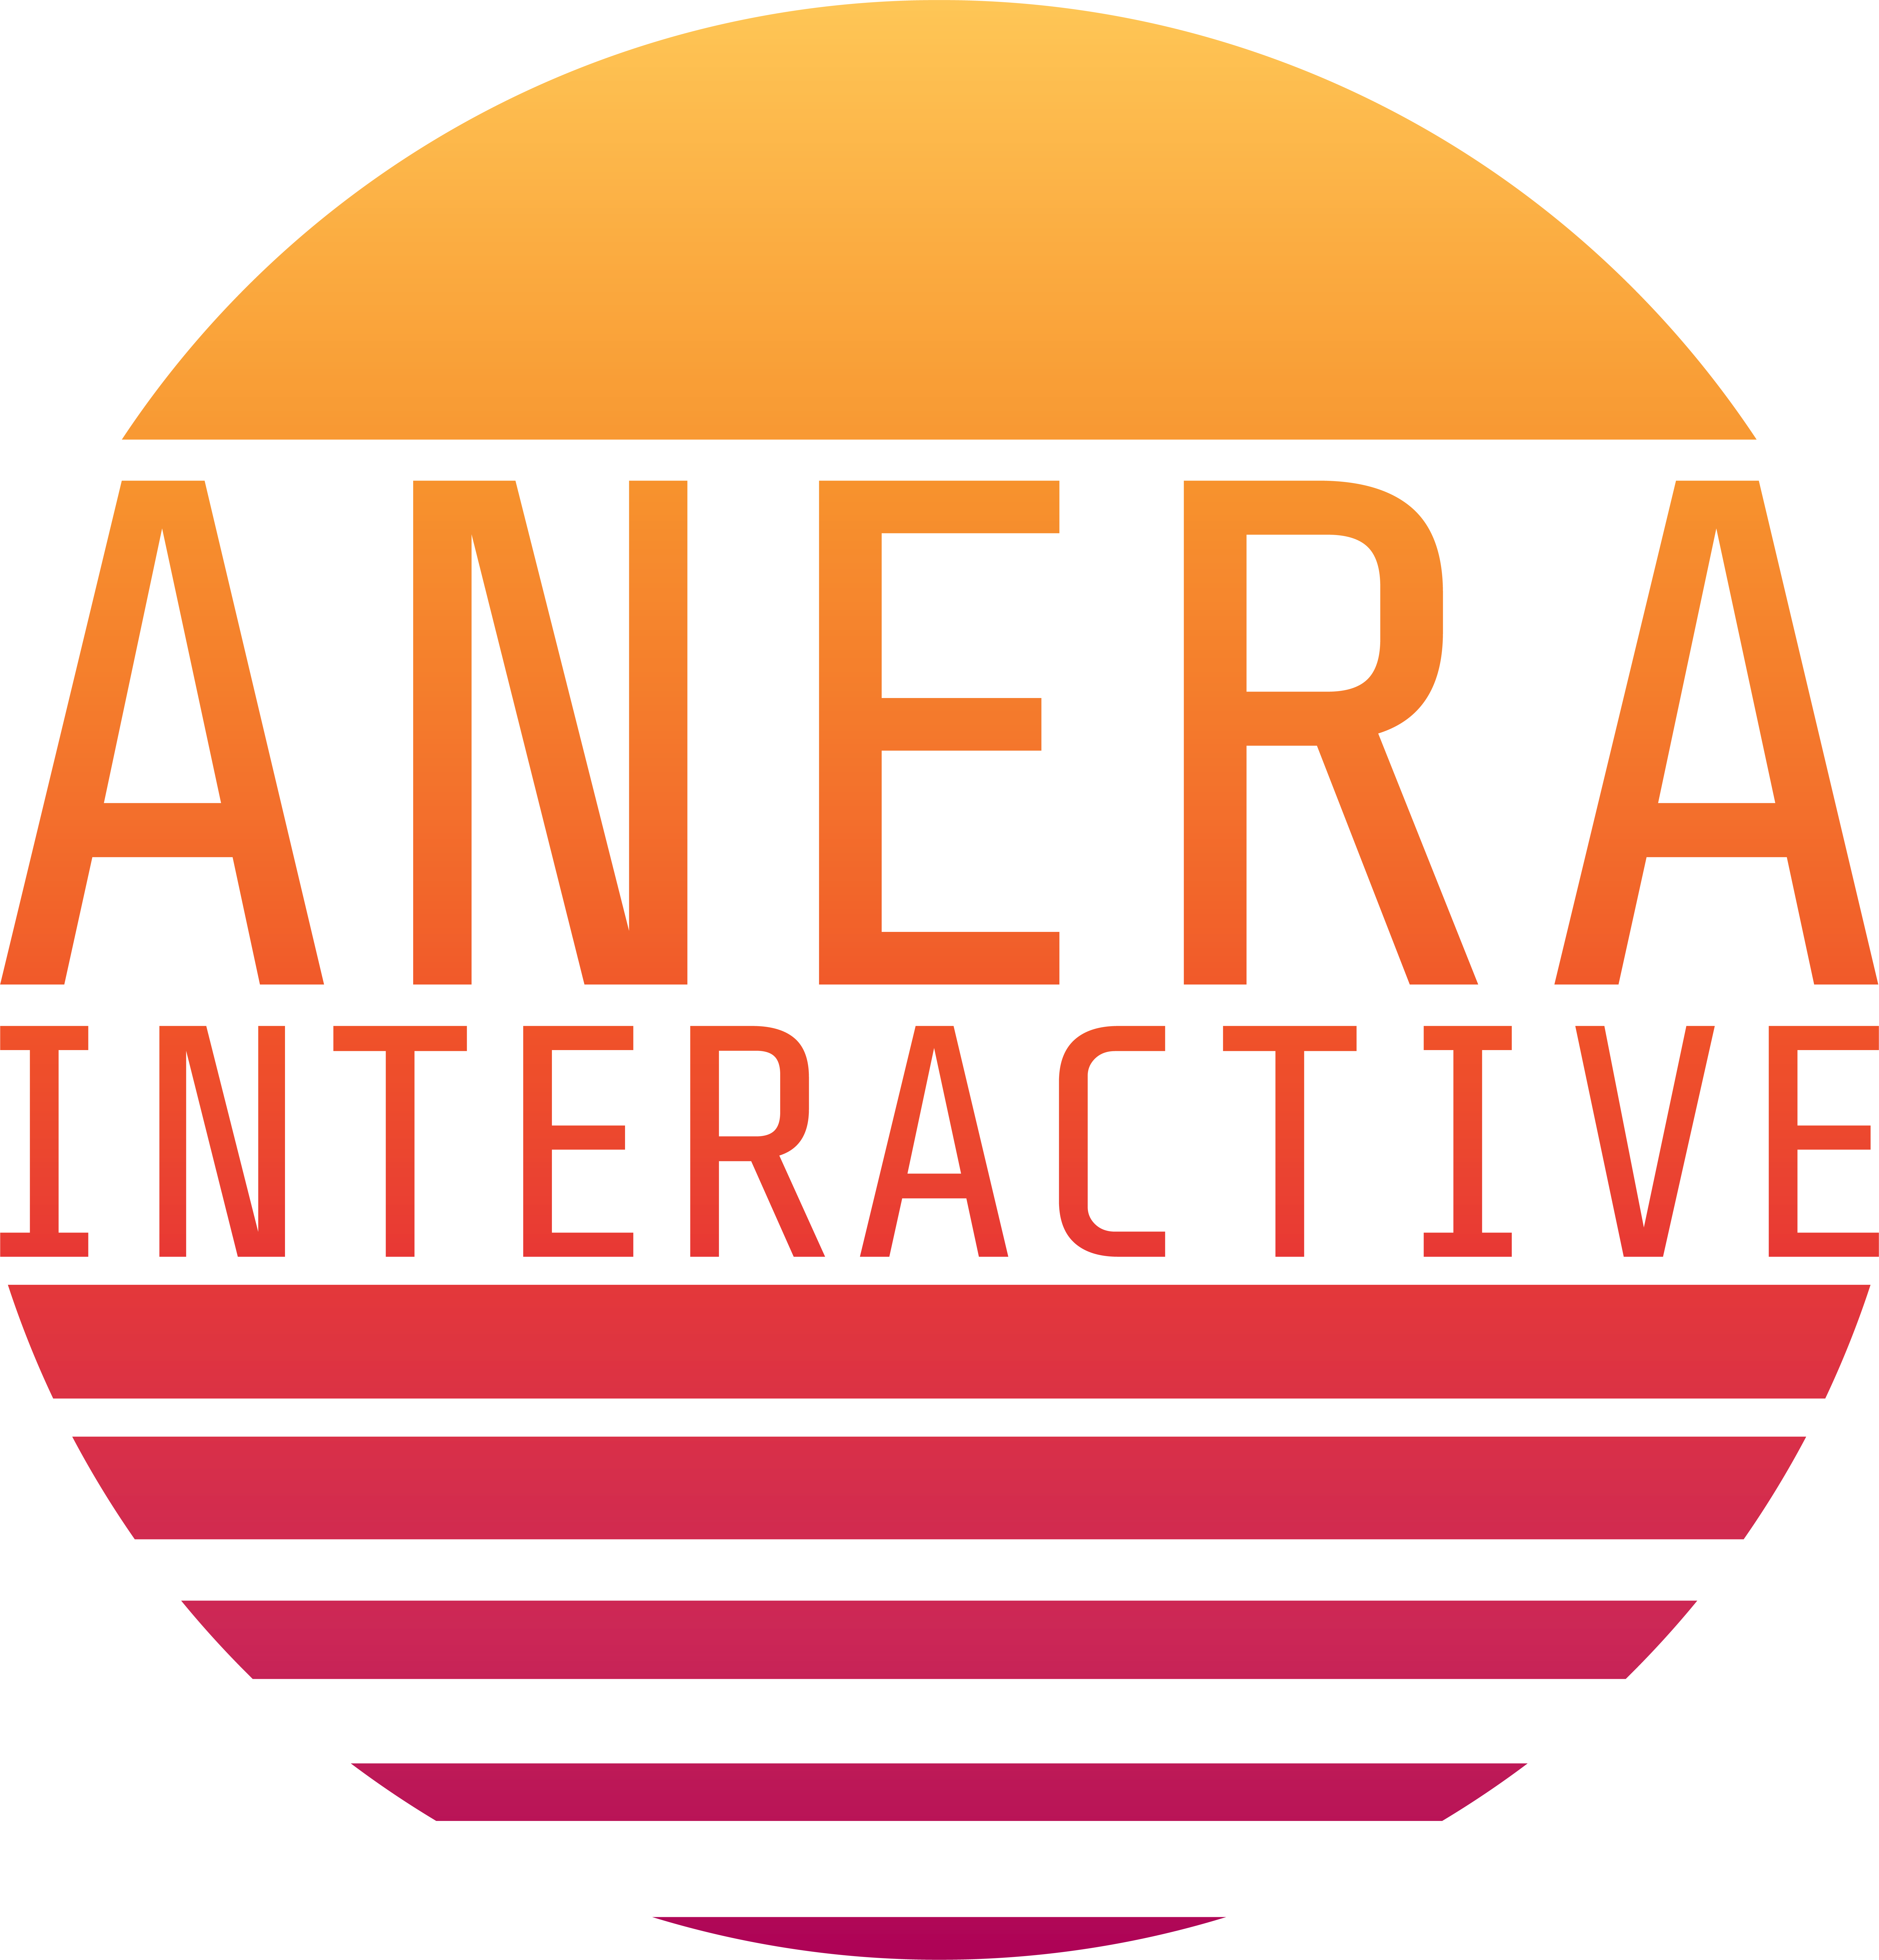 logo of anera, a stylized picture depicting a sunrise with the company name in the middle